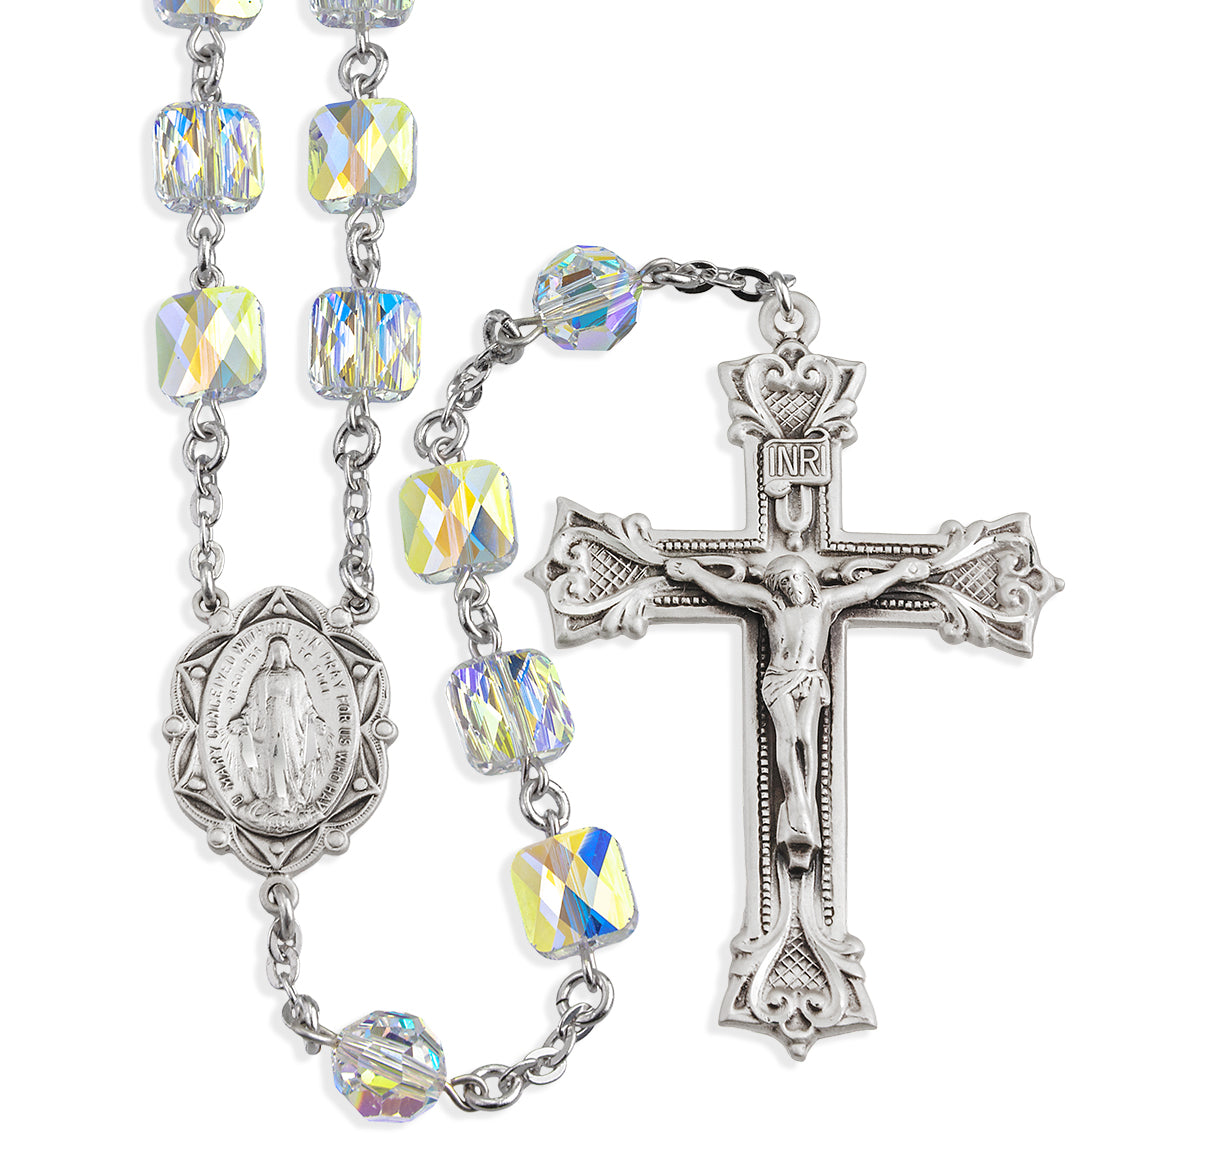 Sterling Silver Rosary Hand Made with Swarovski Crystal 8mm Aurora Borealis Square Beads by HMH